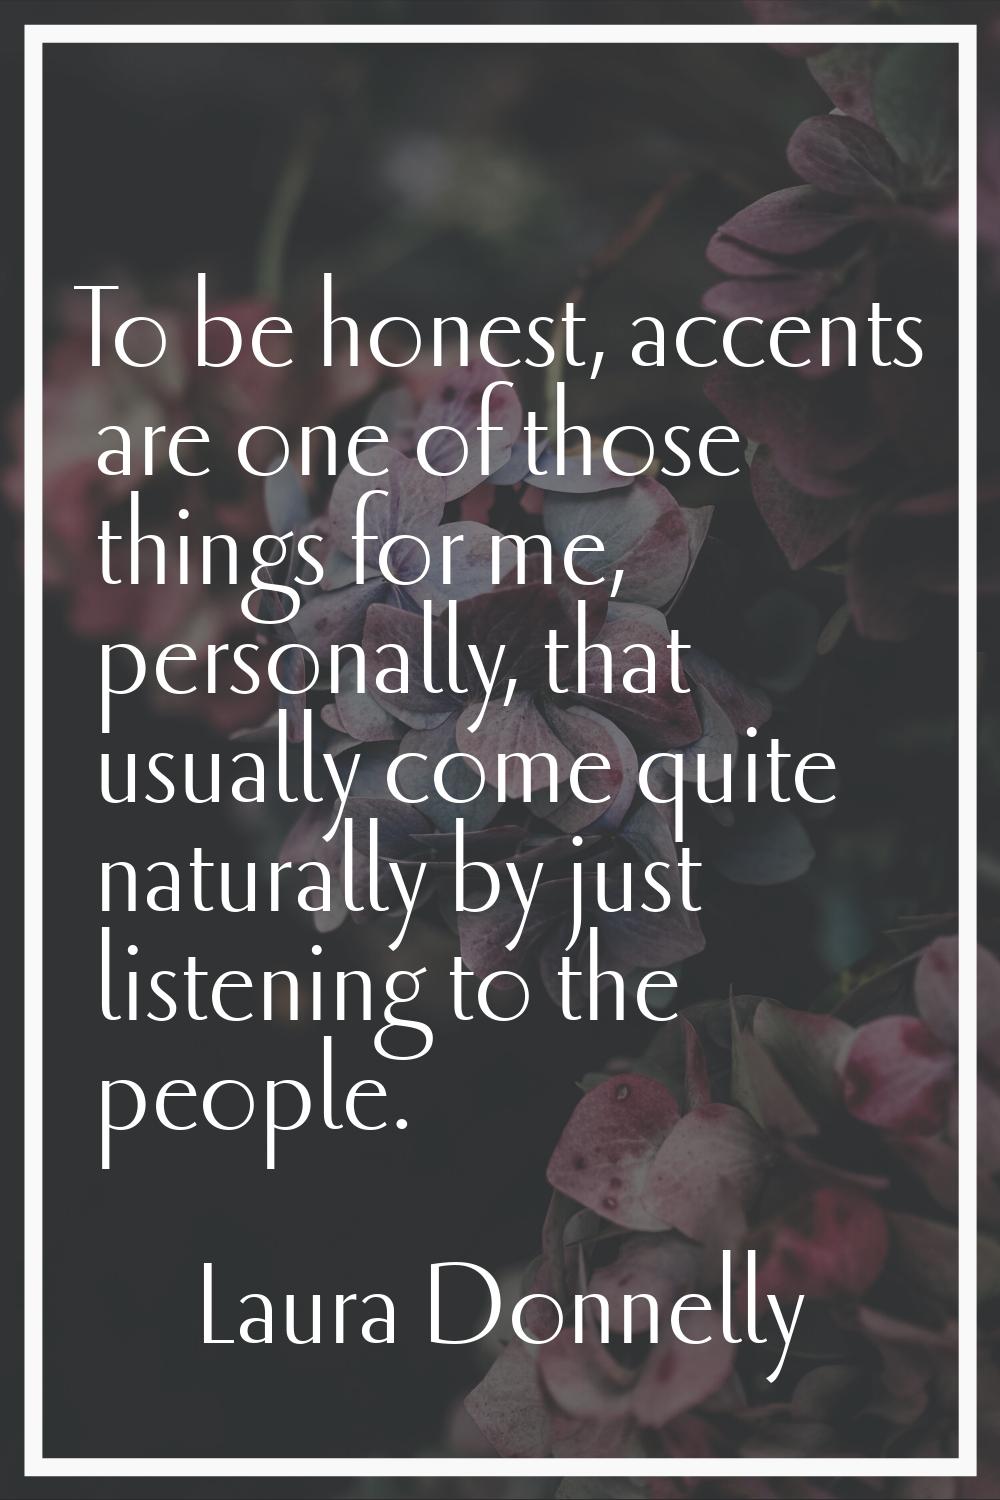 To be honest, accents are one of those things for me, personally, that usually come quite naturally